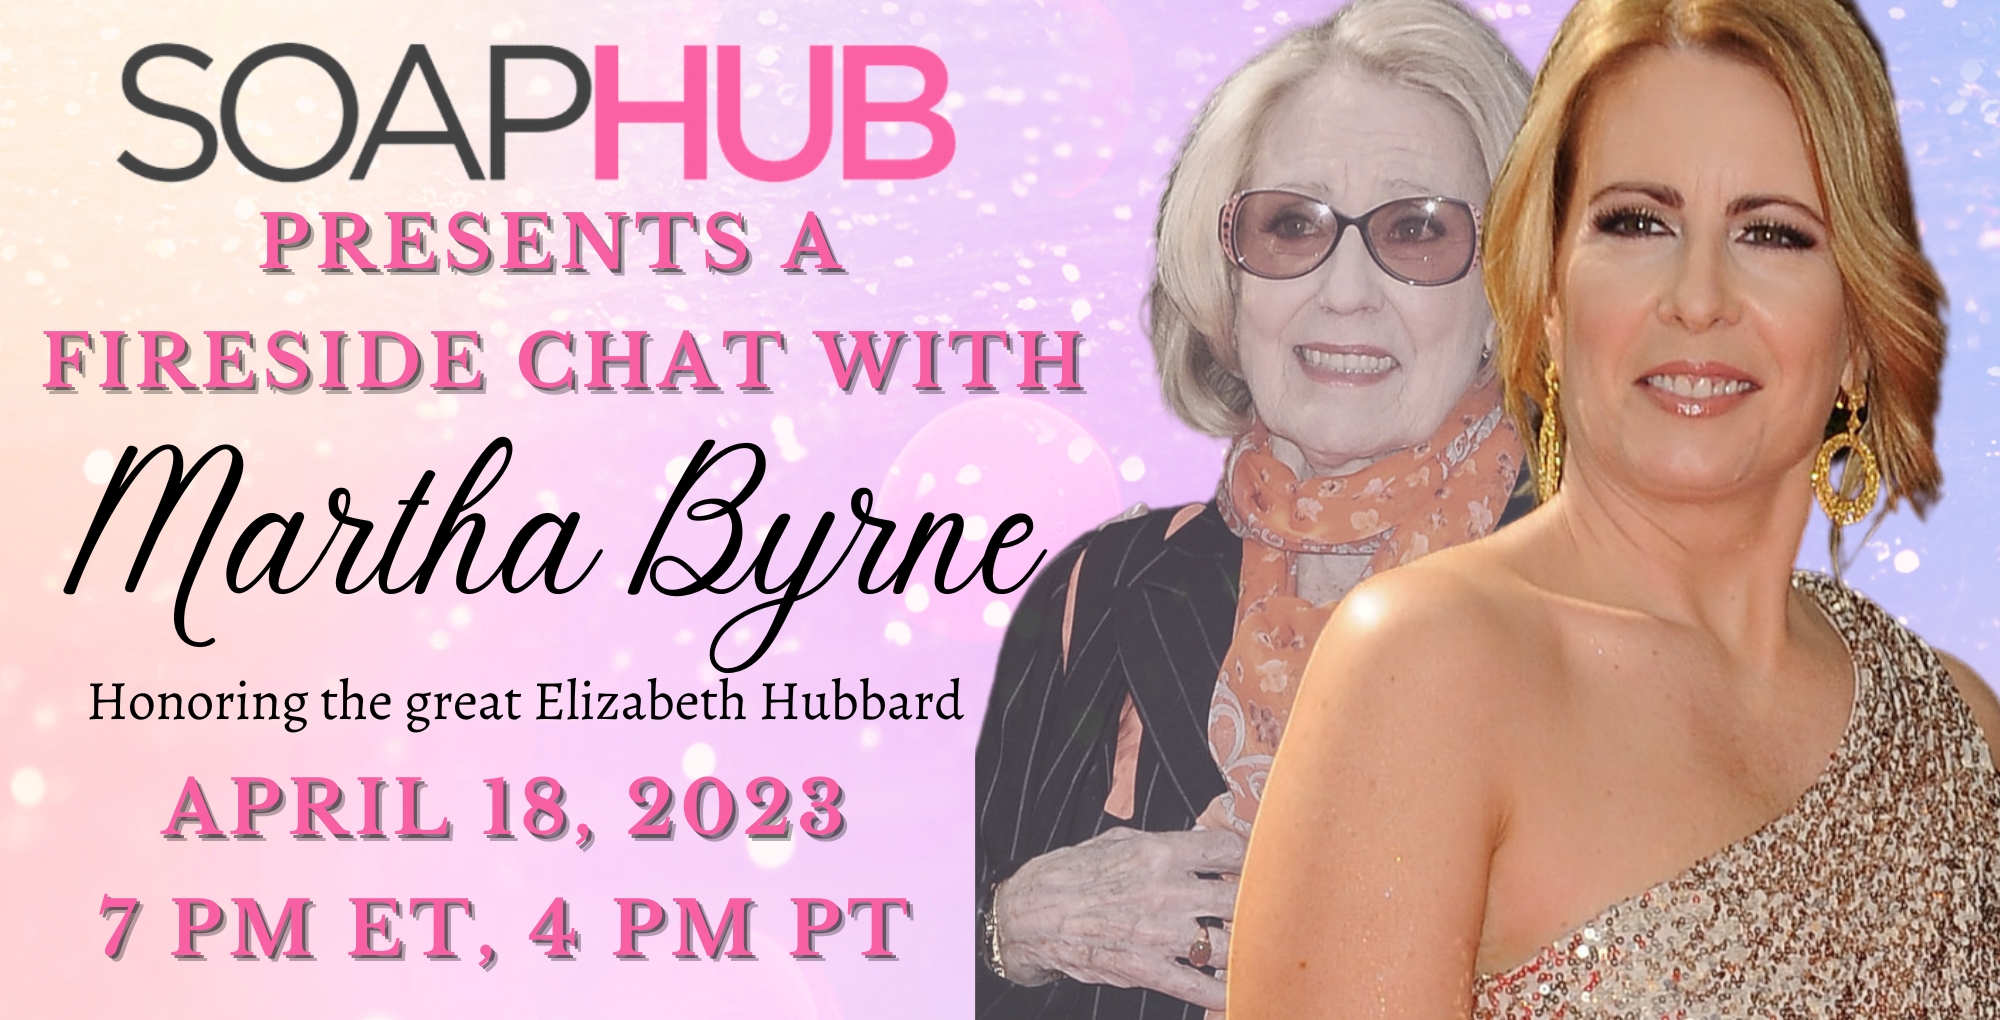 martha byrne will be joining soap hub for a fireside chat in tribute to elizabeth hubbard.